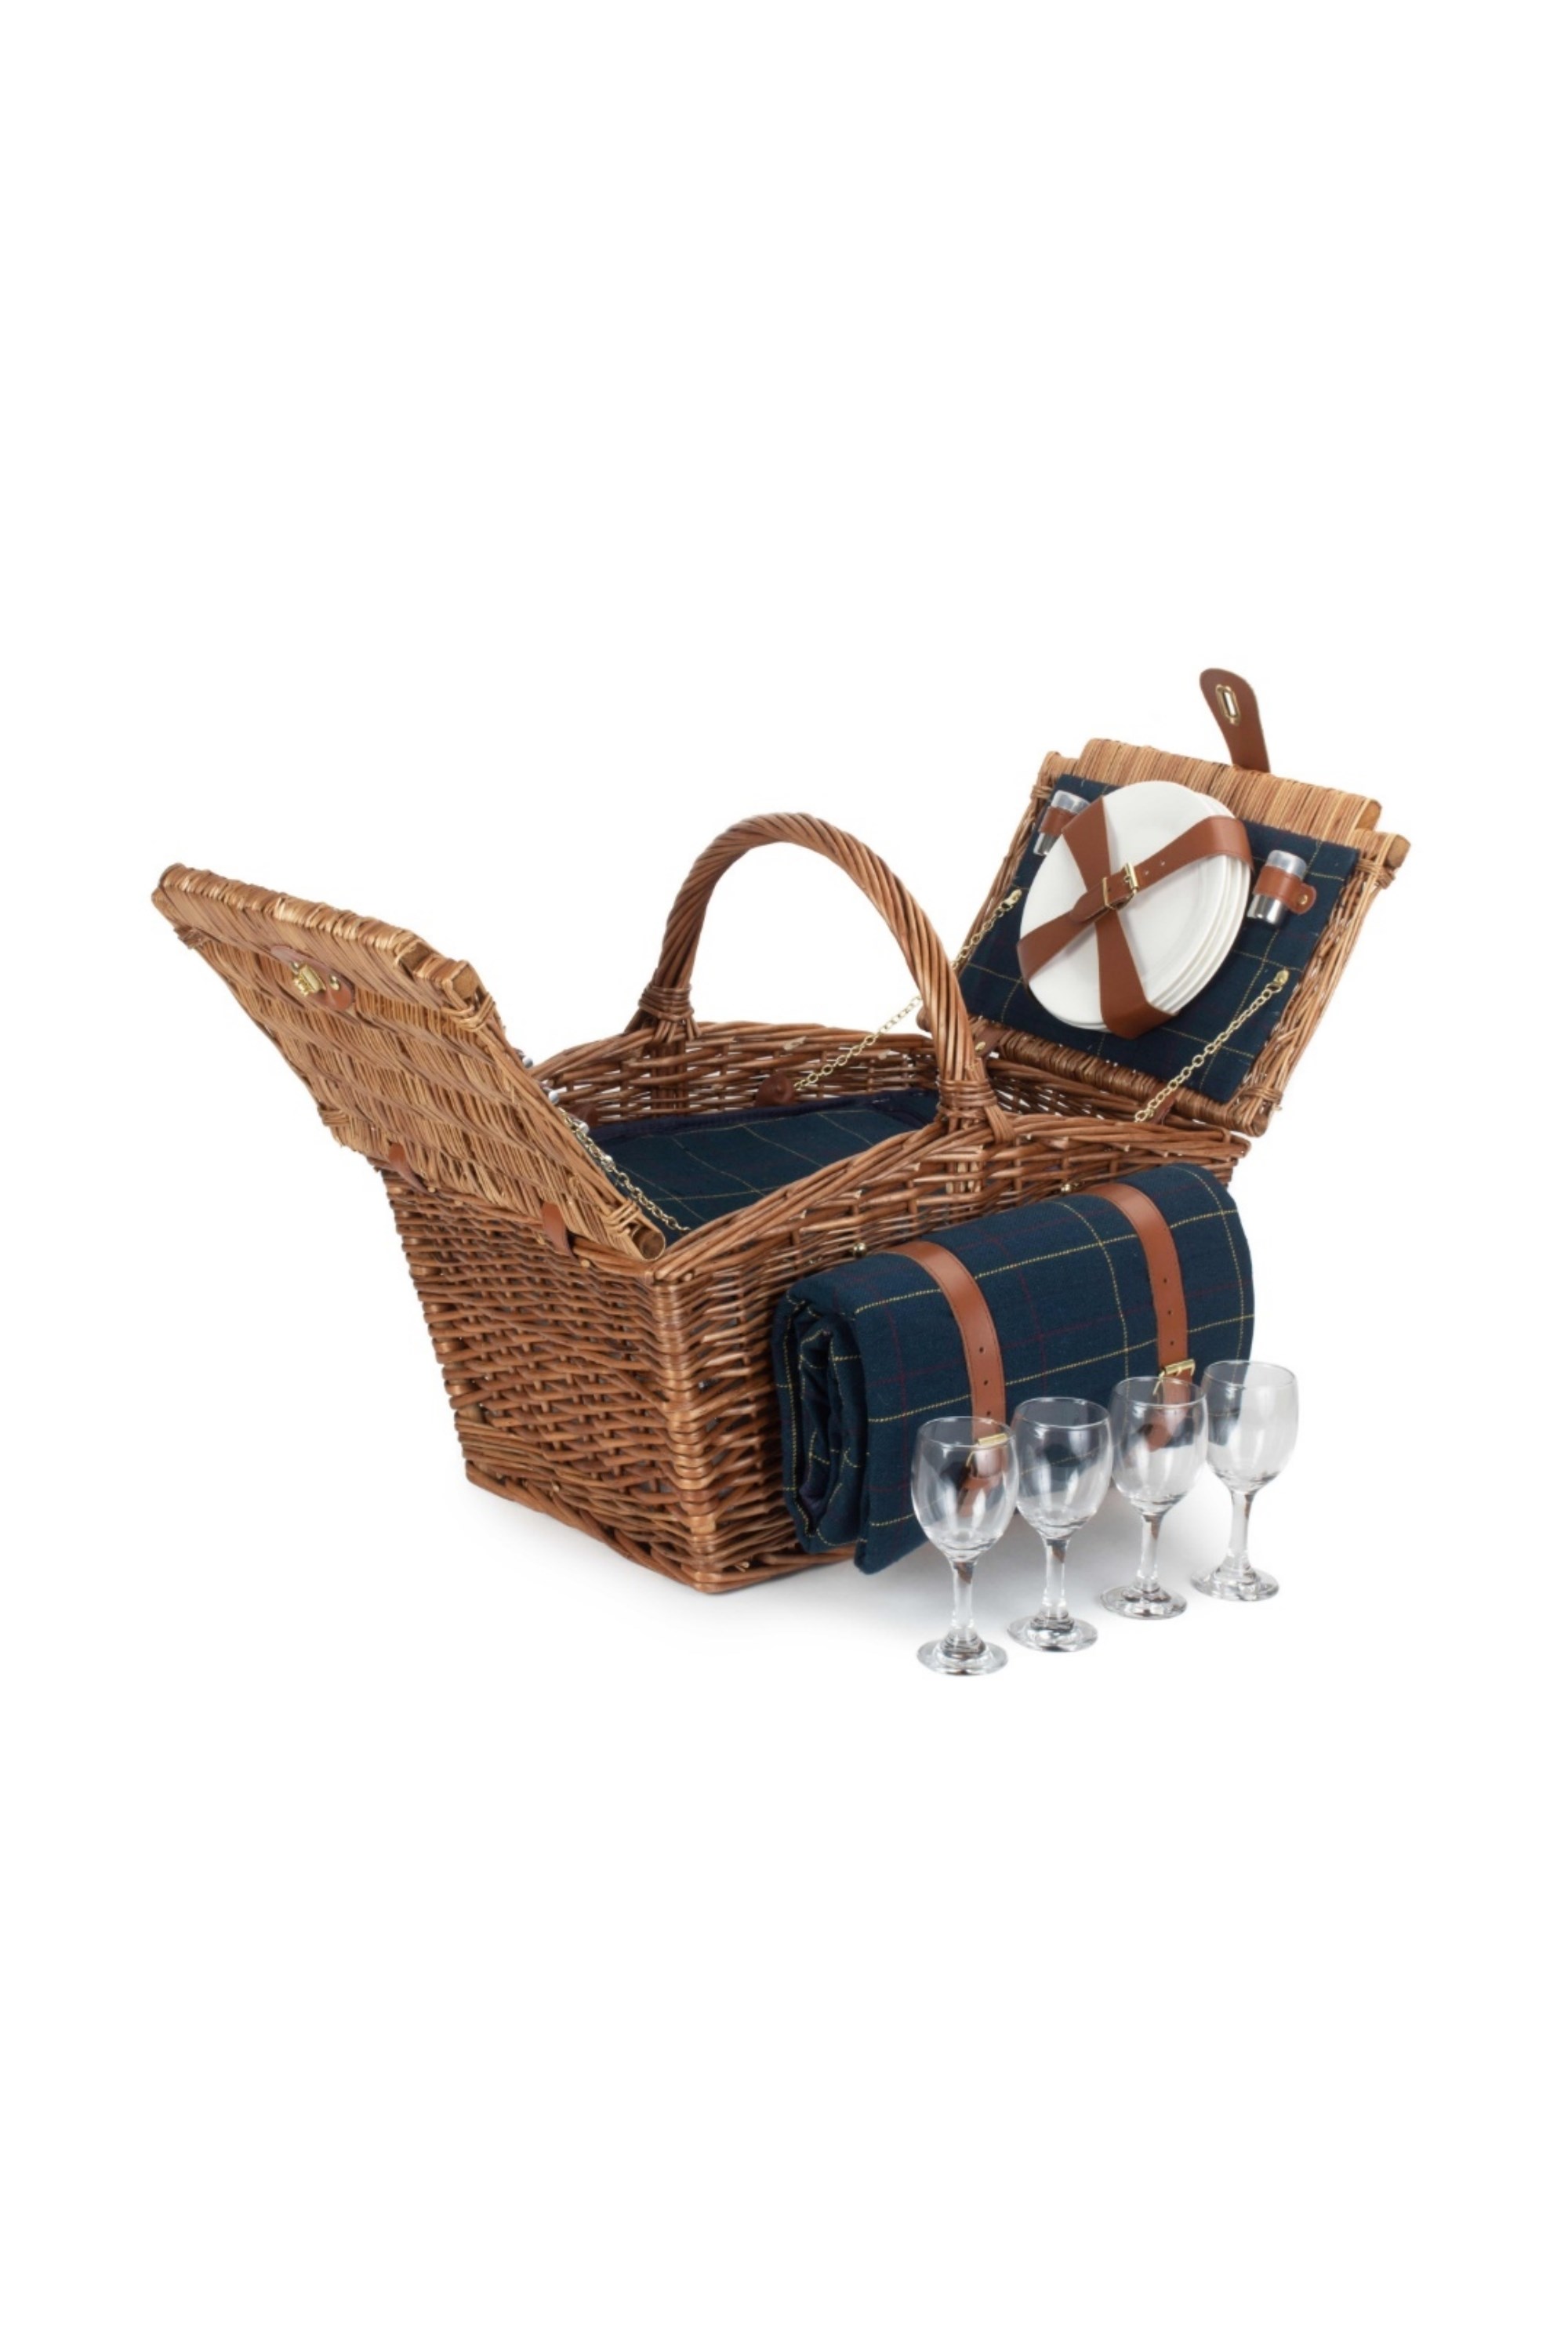 Elegant 4 Person Blue Tweed Fitted Picnic Basket -